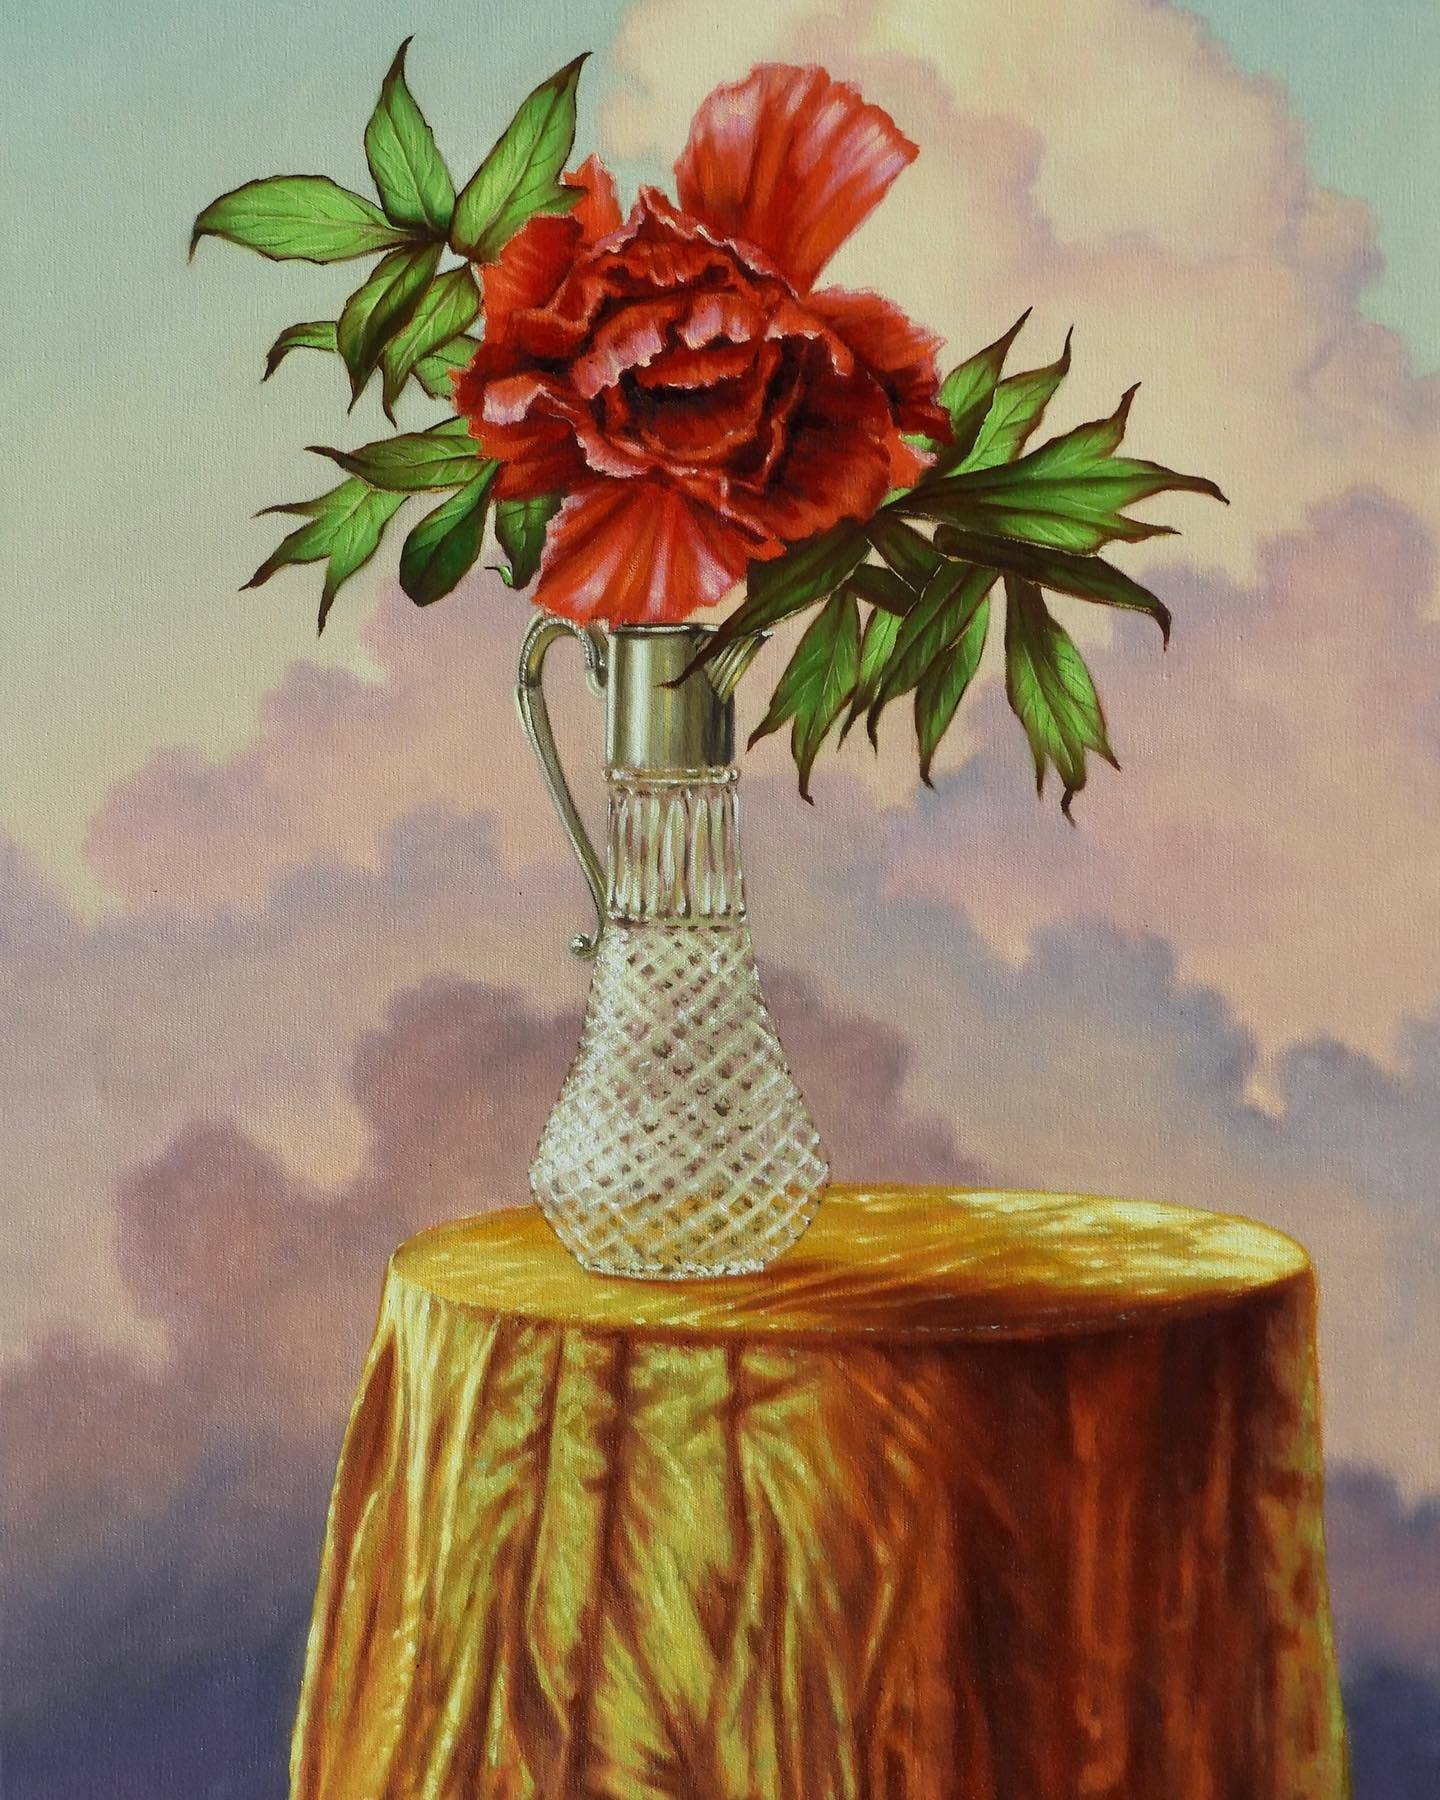 Peony and the endless sky, oil on canvas by Laurence OToole.